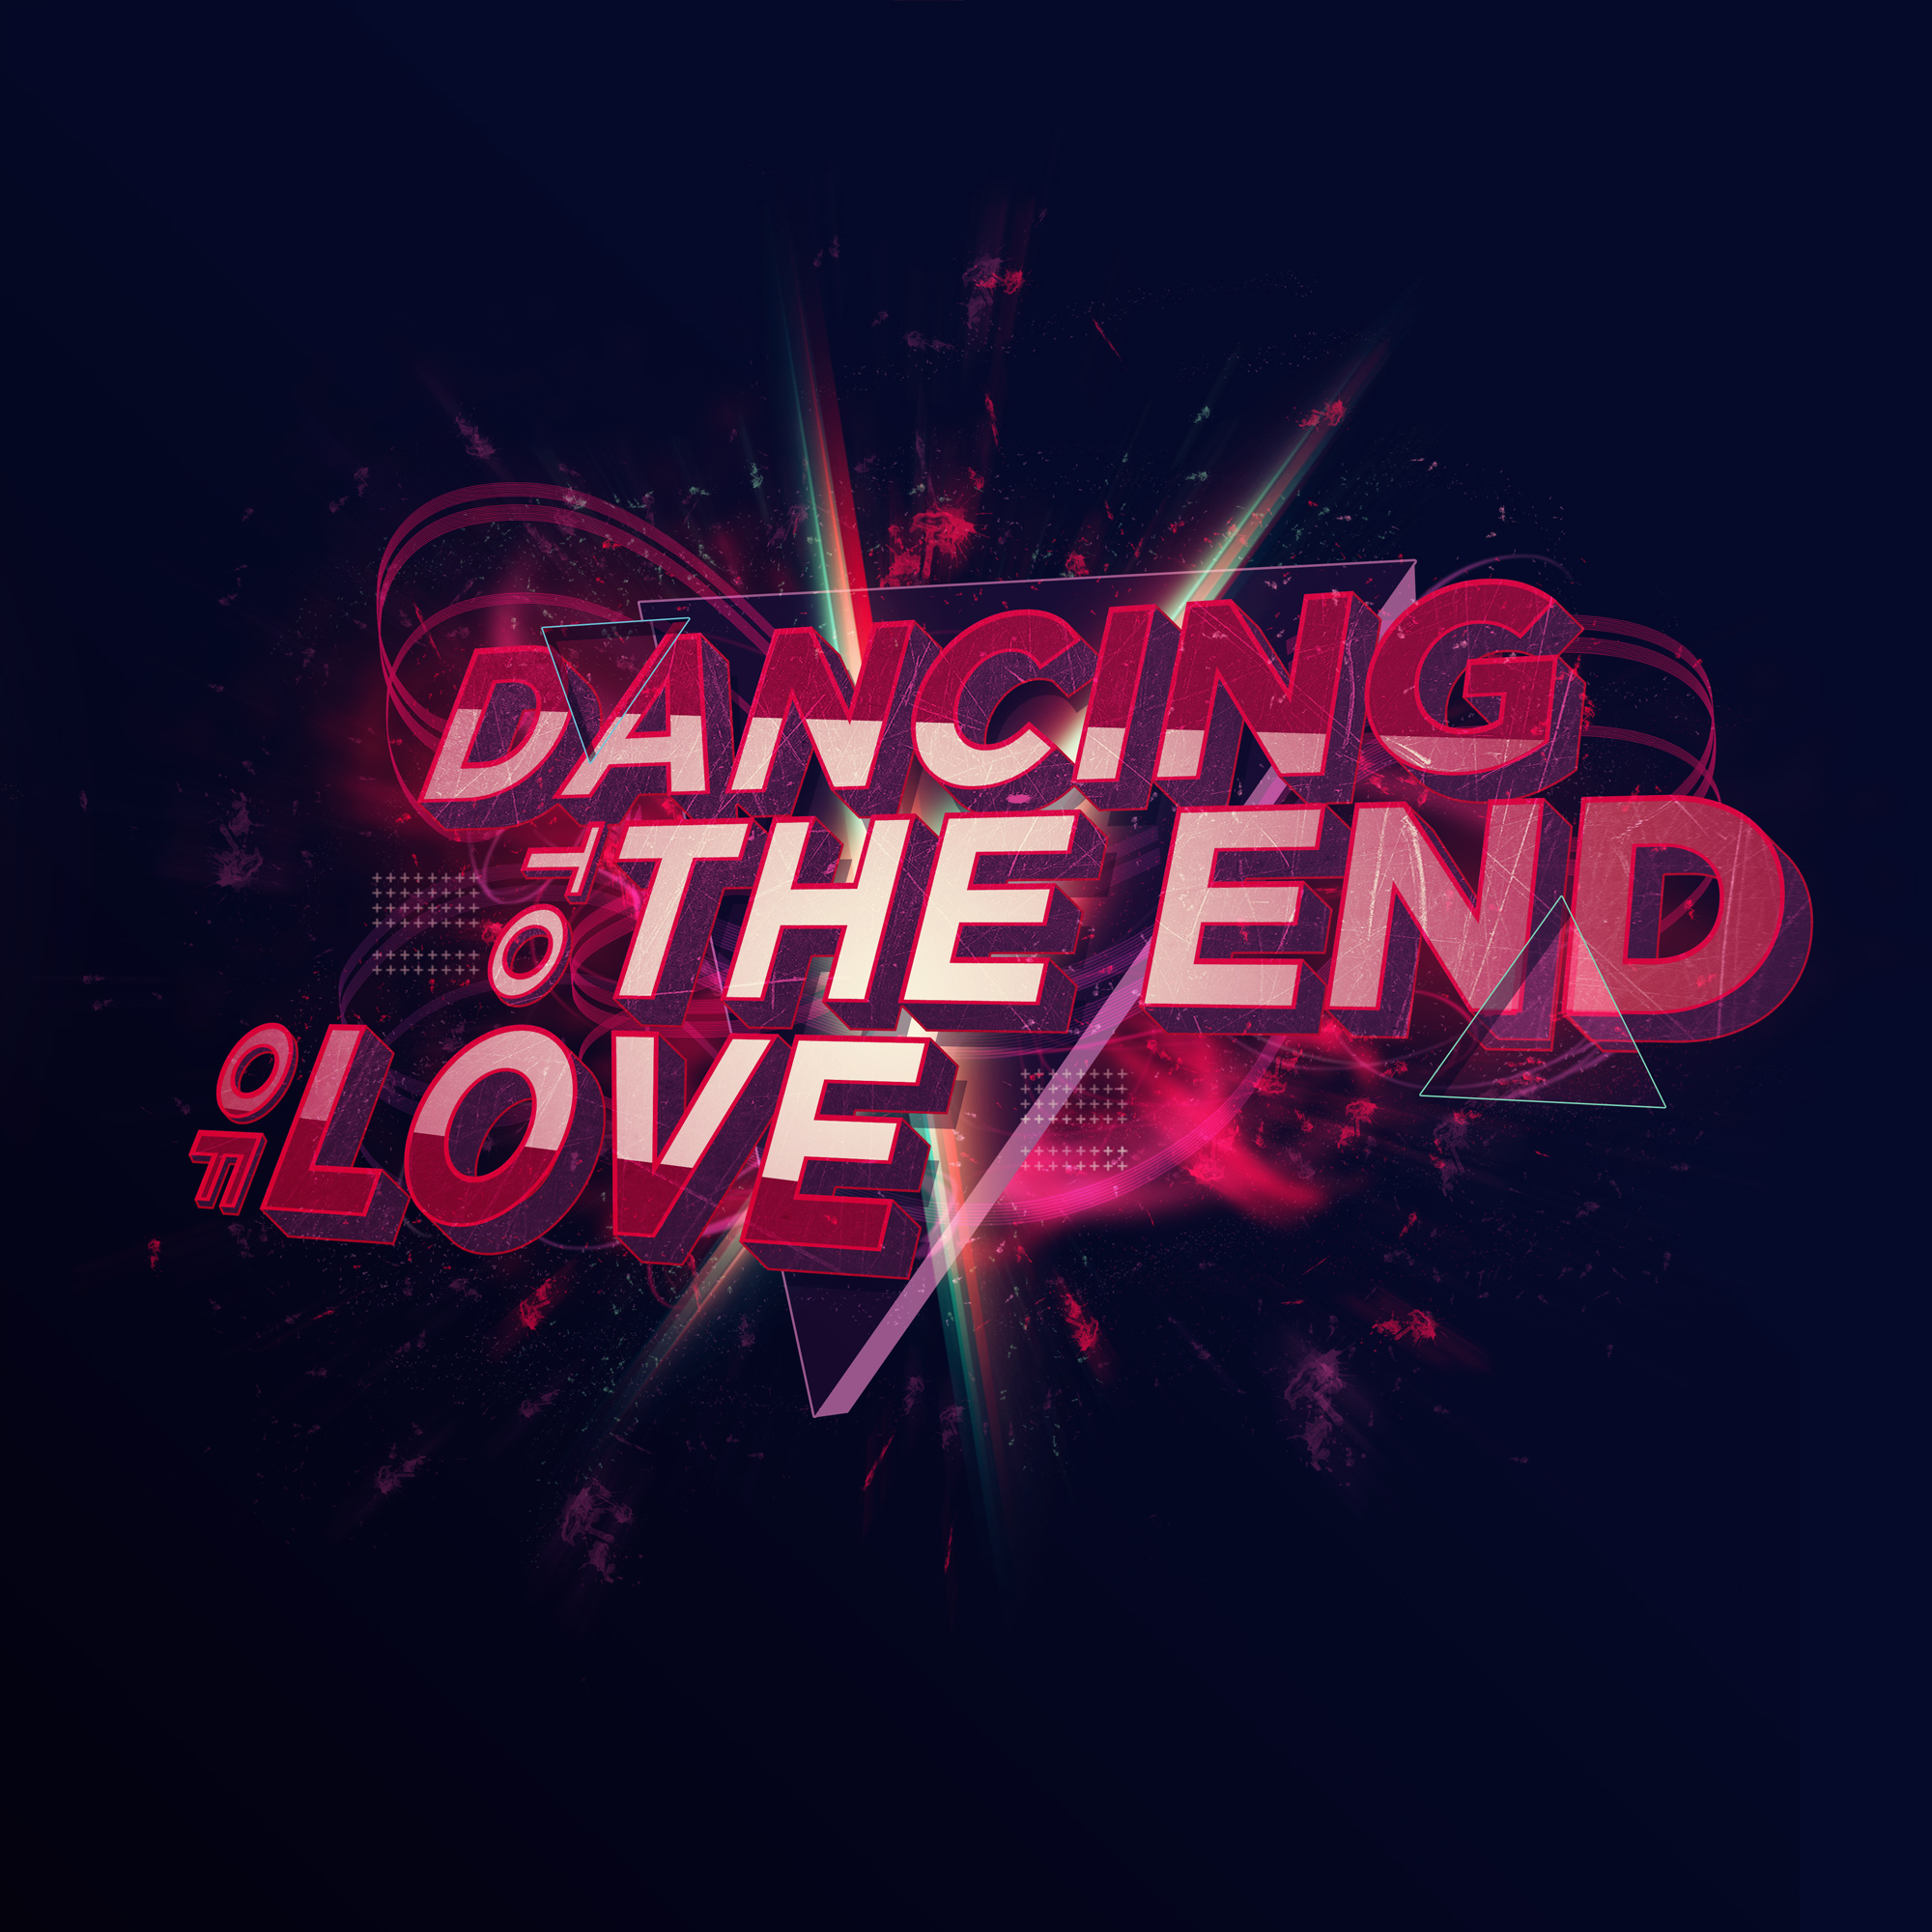 Dancing to the end of love